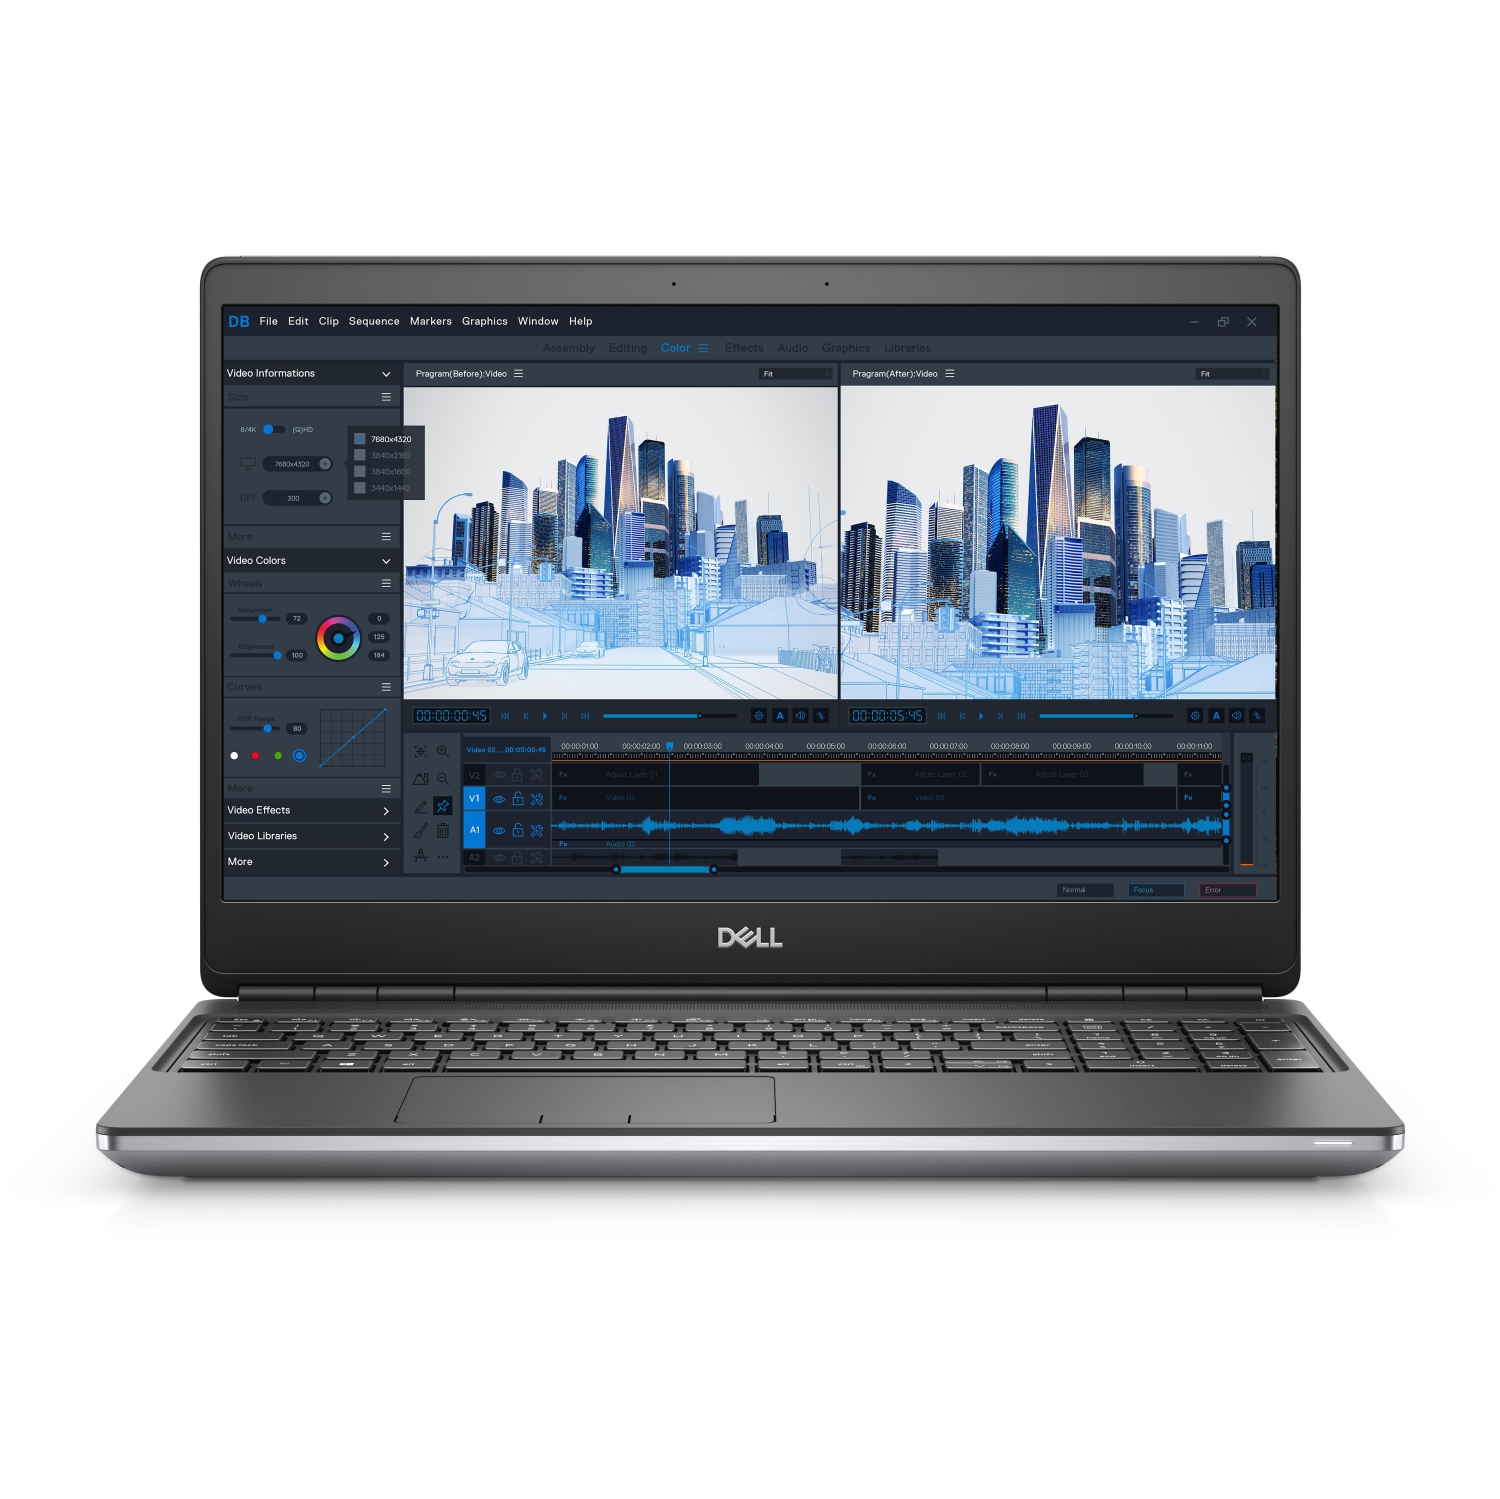 Refurbished (Excellent) - Dell Precision 7000 7560 Workstation Laptop (2021), 15.6" FHD, Core i7 - 512GB SSD - 32GB RAM - Nvidia T1200, 4.6 GHz - 11th Gen CPU Certified